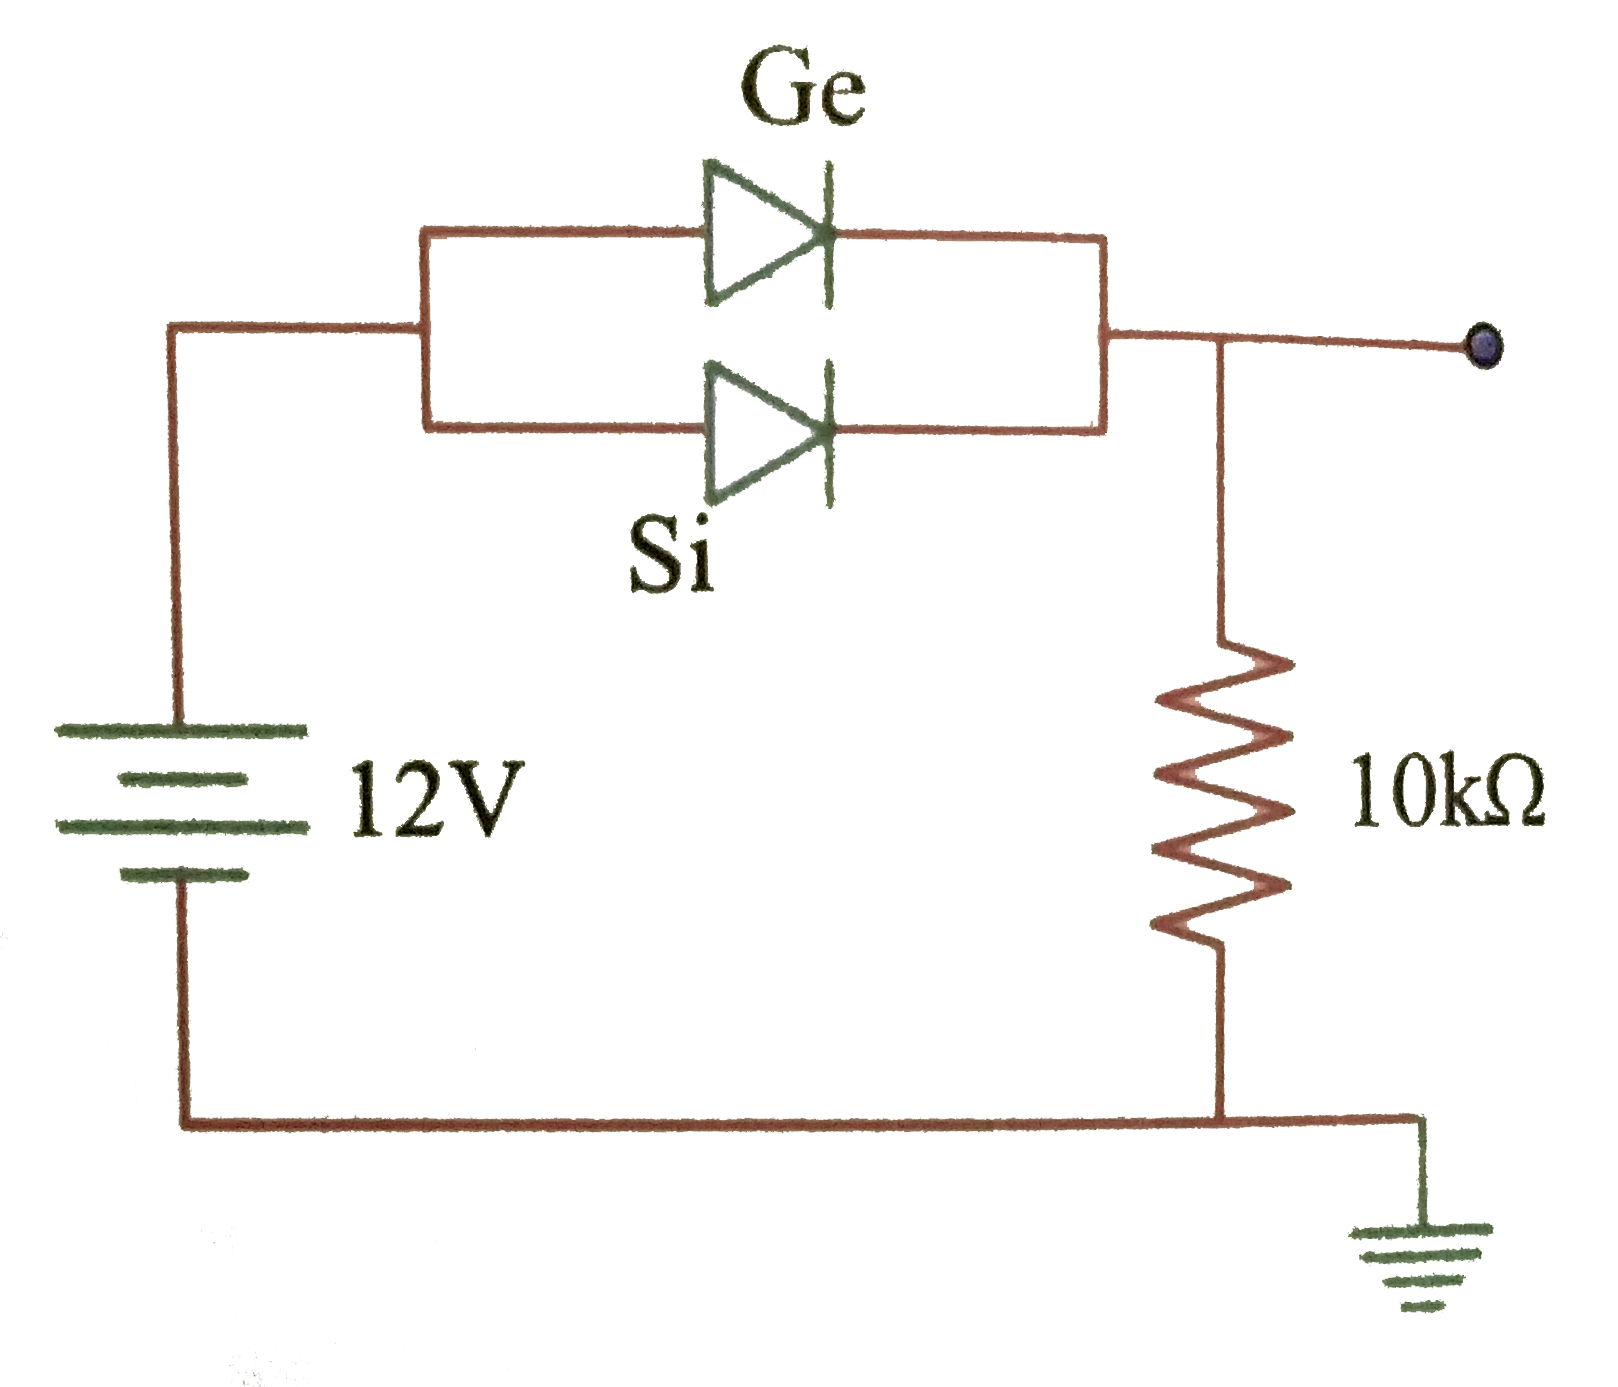 Two junction  diodes, one of germanium (Ge) and other of silicon (Si) are connected as shown in fig to a battery of 12 V and a load resistance 10 kOmega. The germanium diode conducts at 0.3 V and silicon diode at 0.7 V. When current flows in the circuit, the potential of terminal Y will be   .